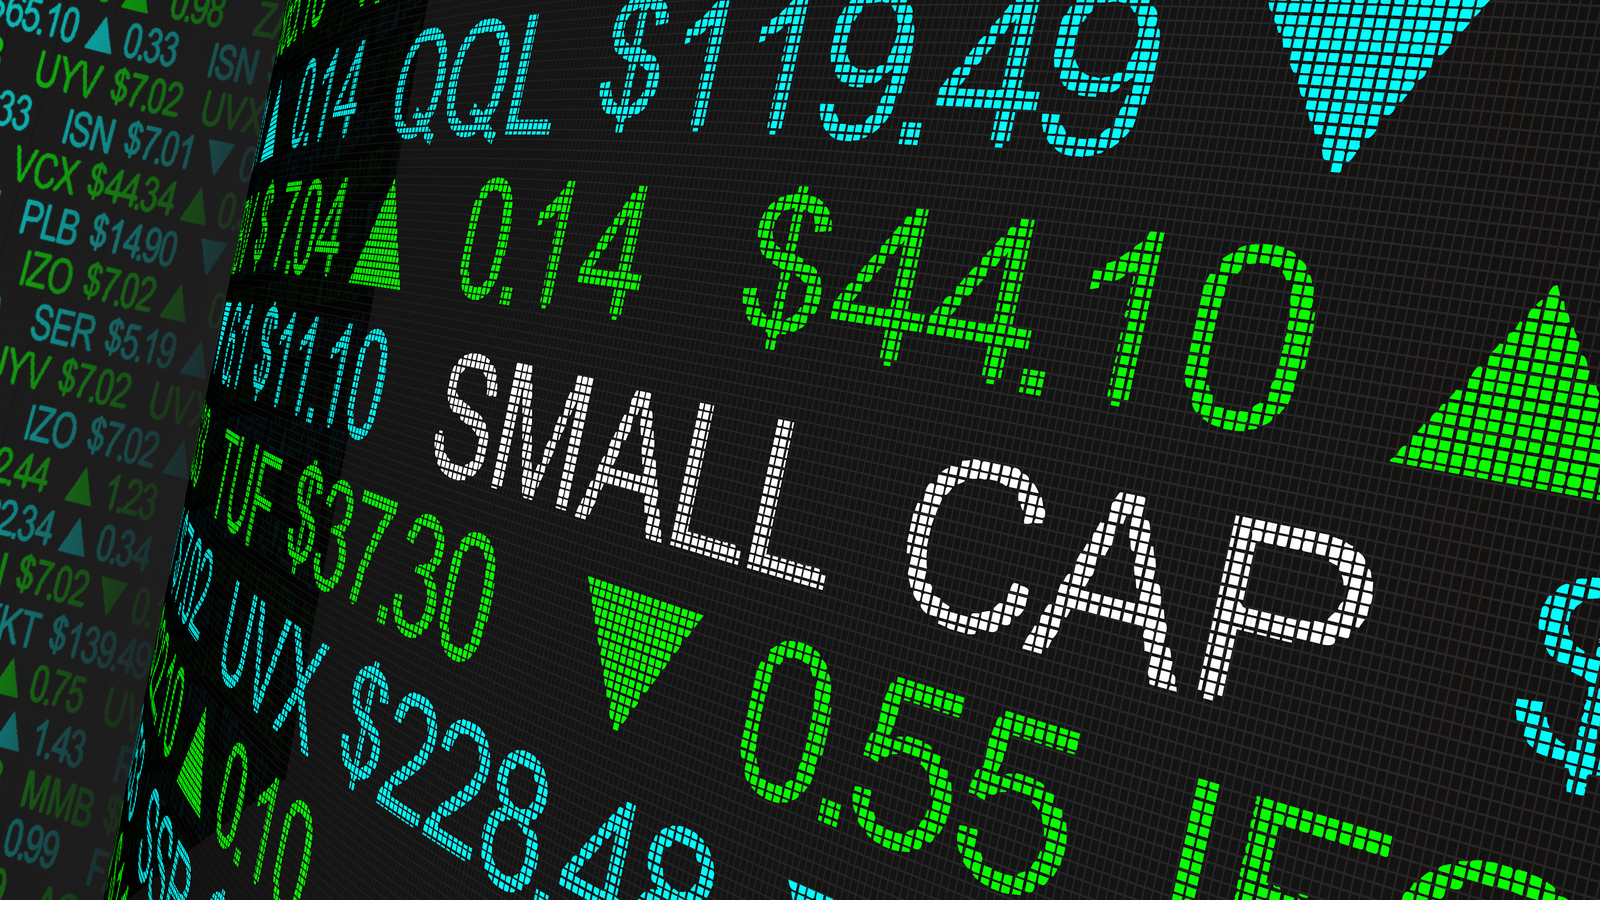 3 Cheap Small-Cap Stocks to Buy Before the Next Breakout